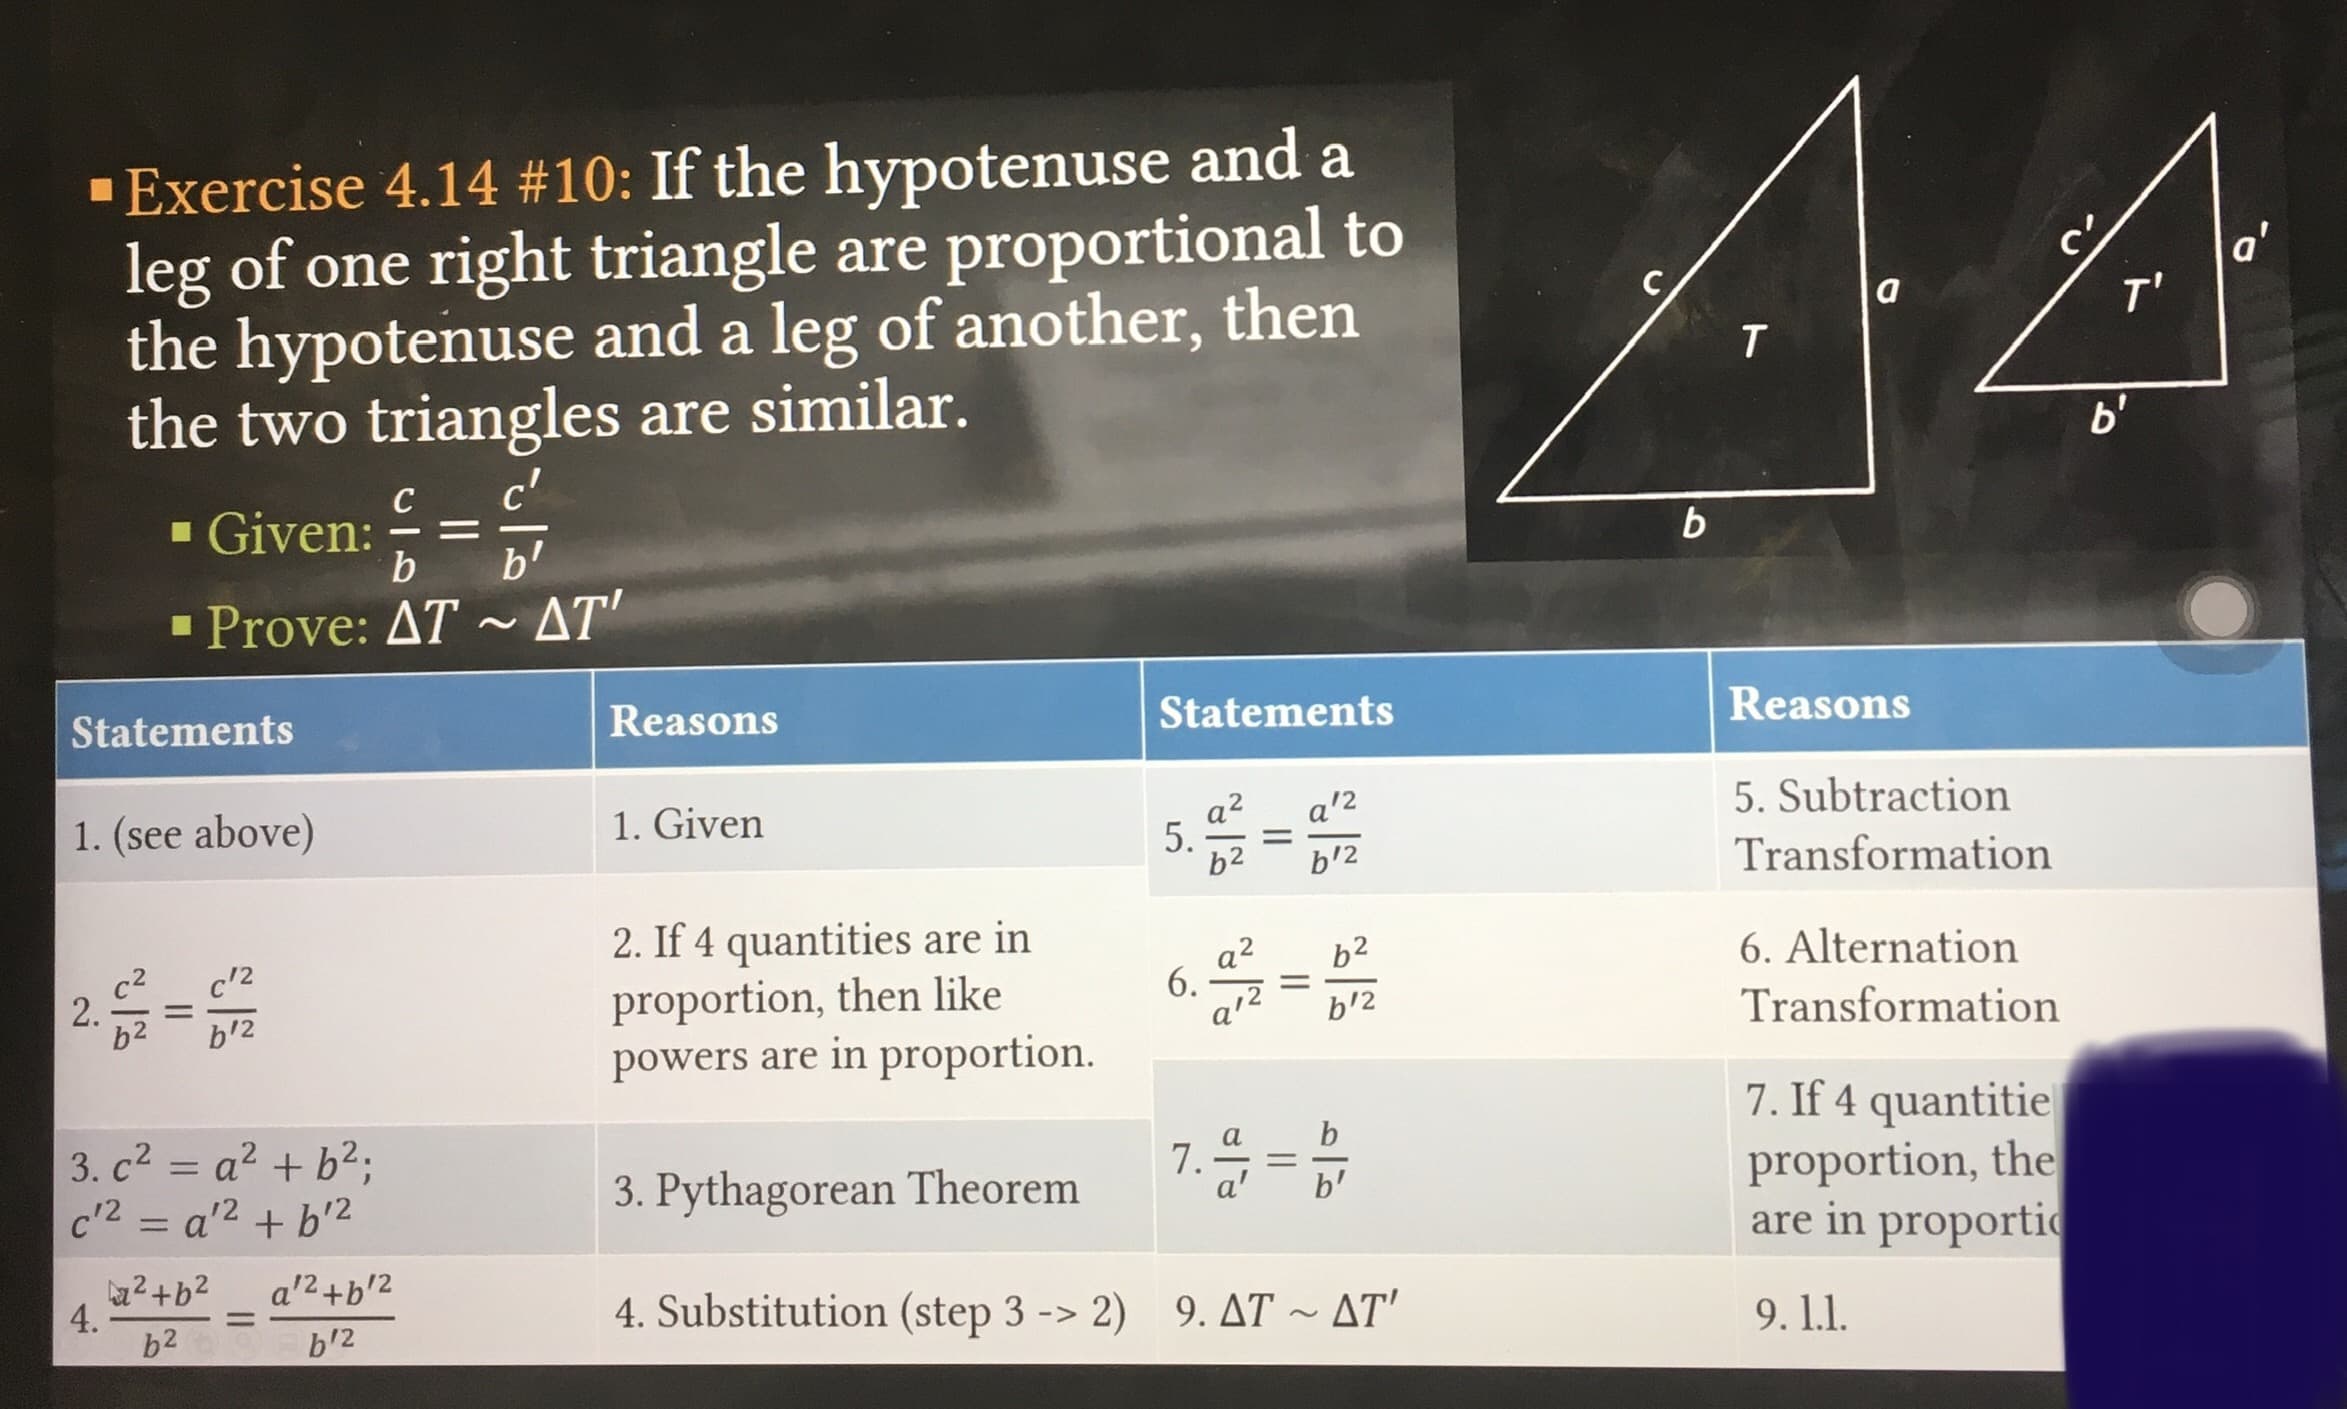 "Exercise 4.14 #10: If the hypotenuse and a
leg of one right triangle are proportional to
the hypotenuse and a leg of another, then
the two triangles are similar.
A4
c'
a'
T'
c'
- Given:
b
b'
- Prove: AT ~ AT'
Statements
Reasons
Statements
Reasons
1. (see above)
1. Given
a2
is
b2
5. Subtraction
a'2
%|
b'2
Transformation
2. If 4 quantities are in
proportion, then like
powers are in proportion.
c2
c'2
a2
b2
6. Alternation
%3D
b2
b'2
b'2
Transformation
3. c2 = a2 + b2;
c'2 = a'2 + b'2
7. If 4 quantitie
proportion, the
are in proportic
b.
3. Pythagorean Theorem
b'
a'
a?+b2
4.
b2
a'2+b'2
%3D
b'2
4. Substitution (step 3 -> 2) 9. AT ~ AT'
9. 1.1.
6.
7.
2.
